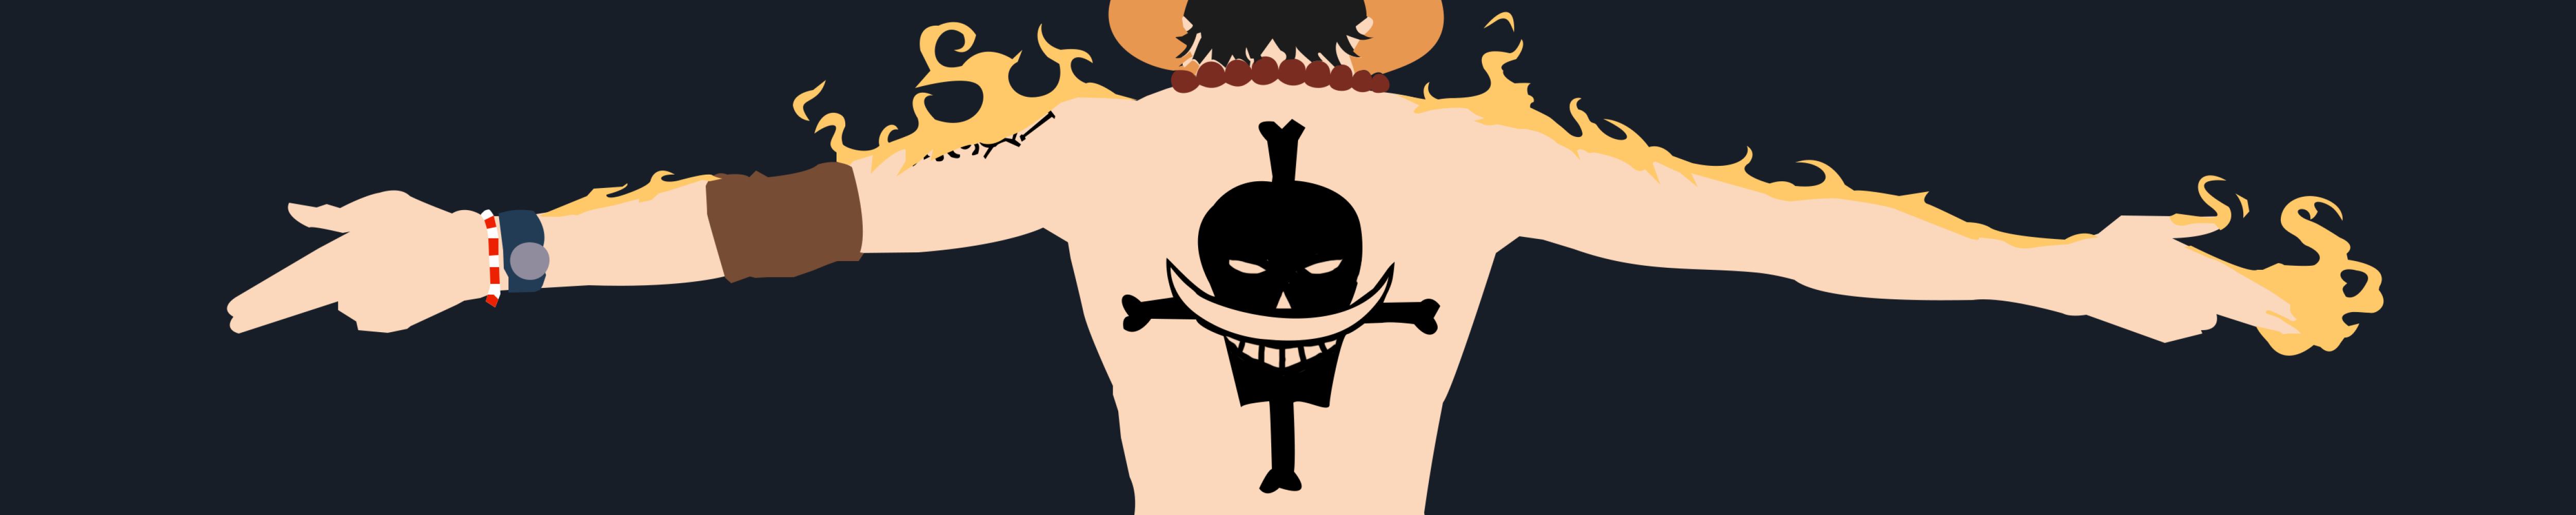 5001x1000 Portgas Ace Cool One Piece 5001x1000 Resolution Wallpaper, HD ...